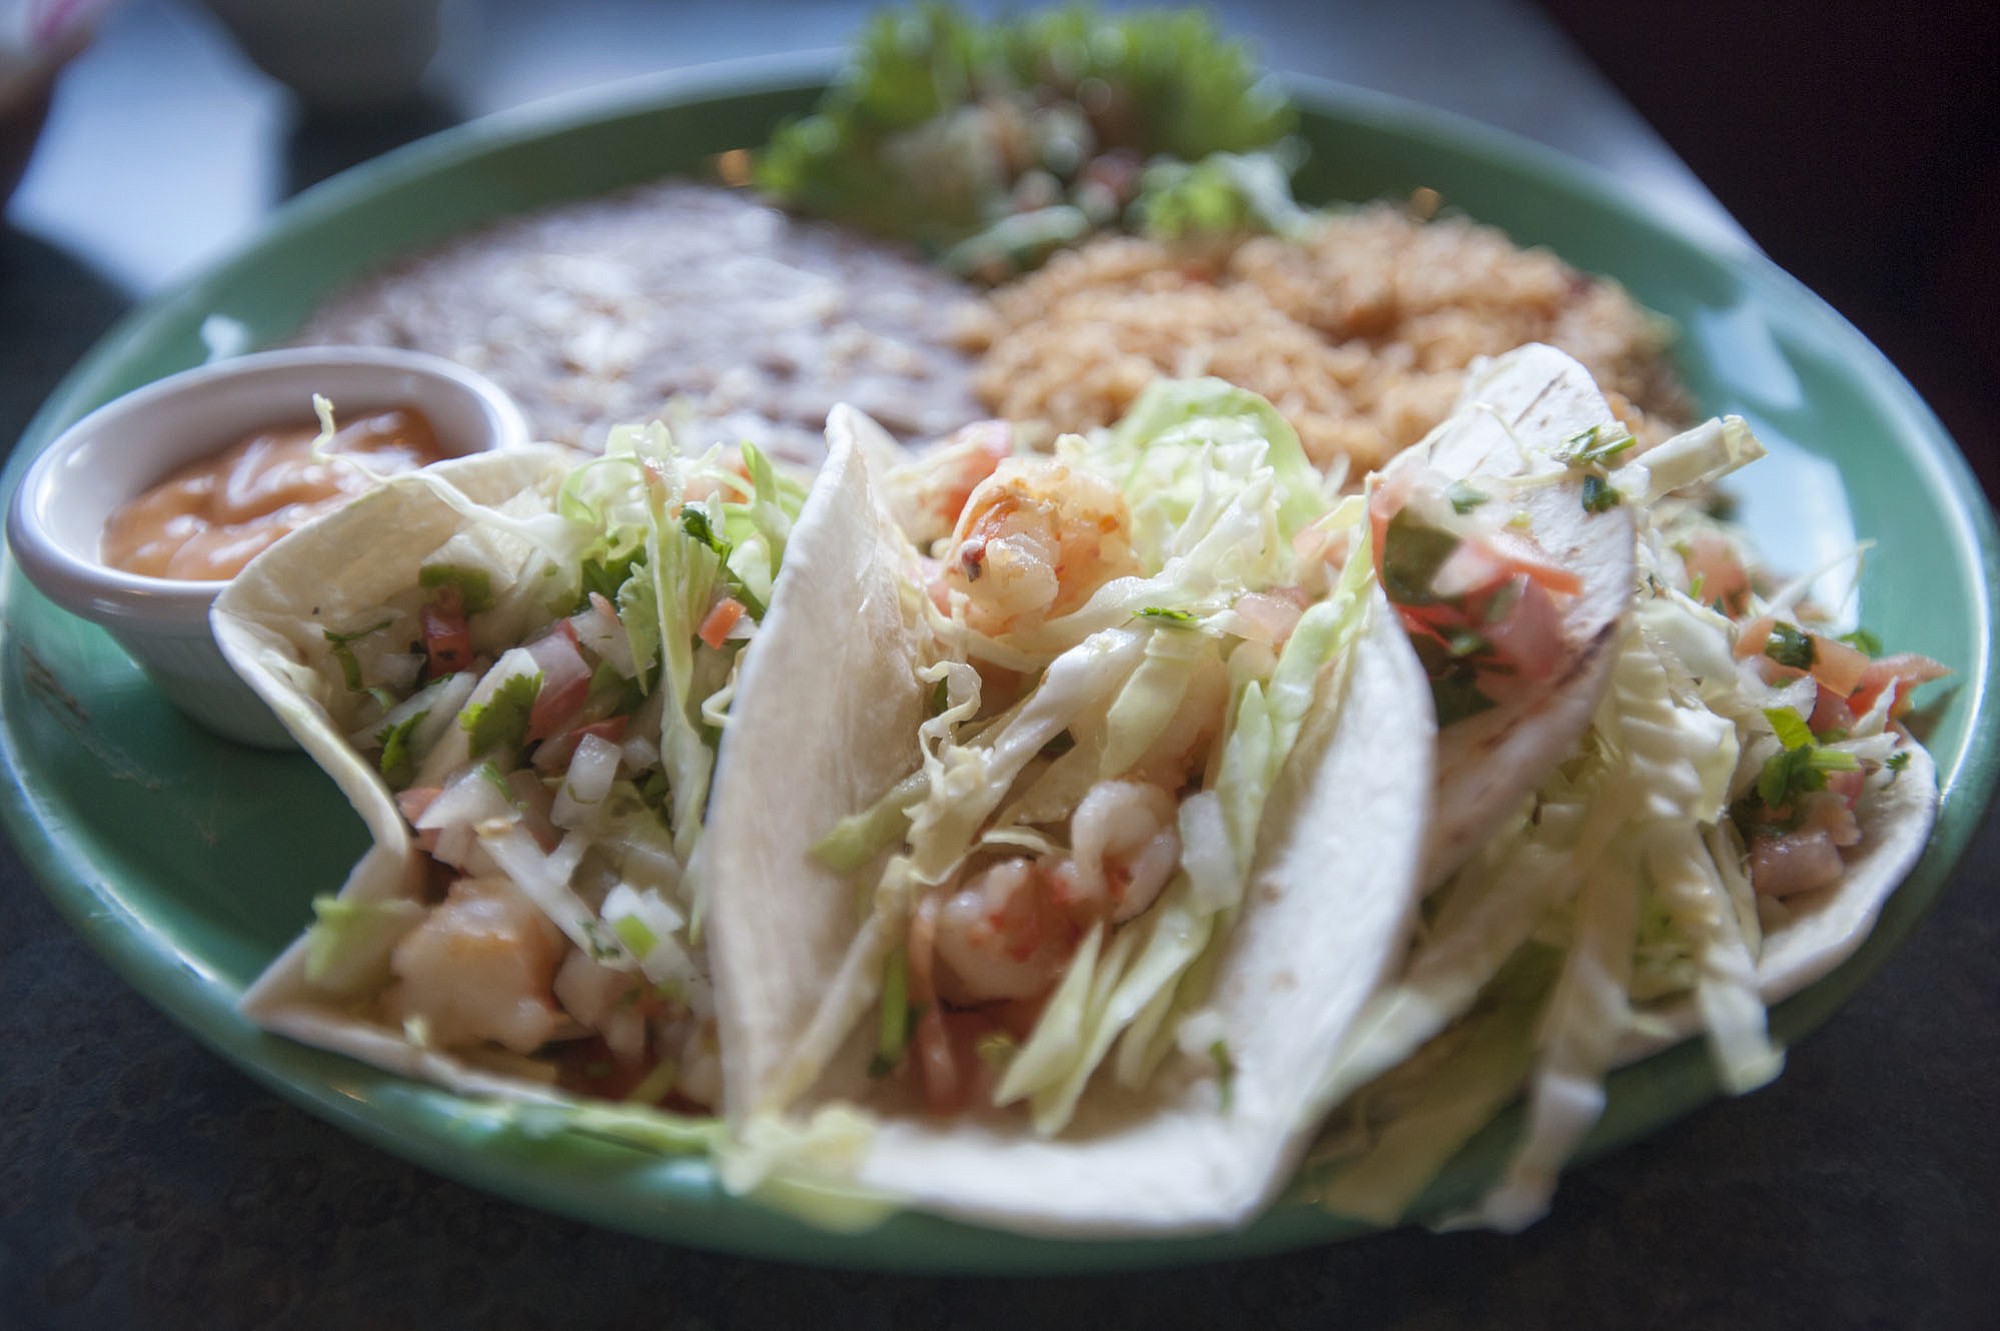 Fish tacos with shrimp substituted for the fish are served at 2 Margaritas Grill in Vancouver.